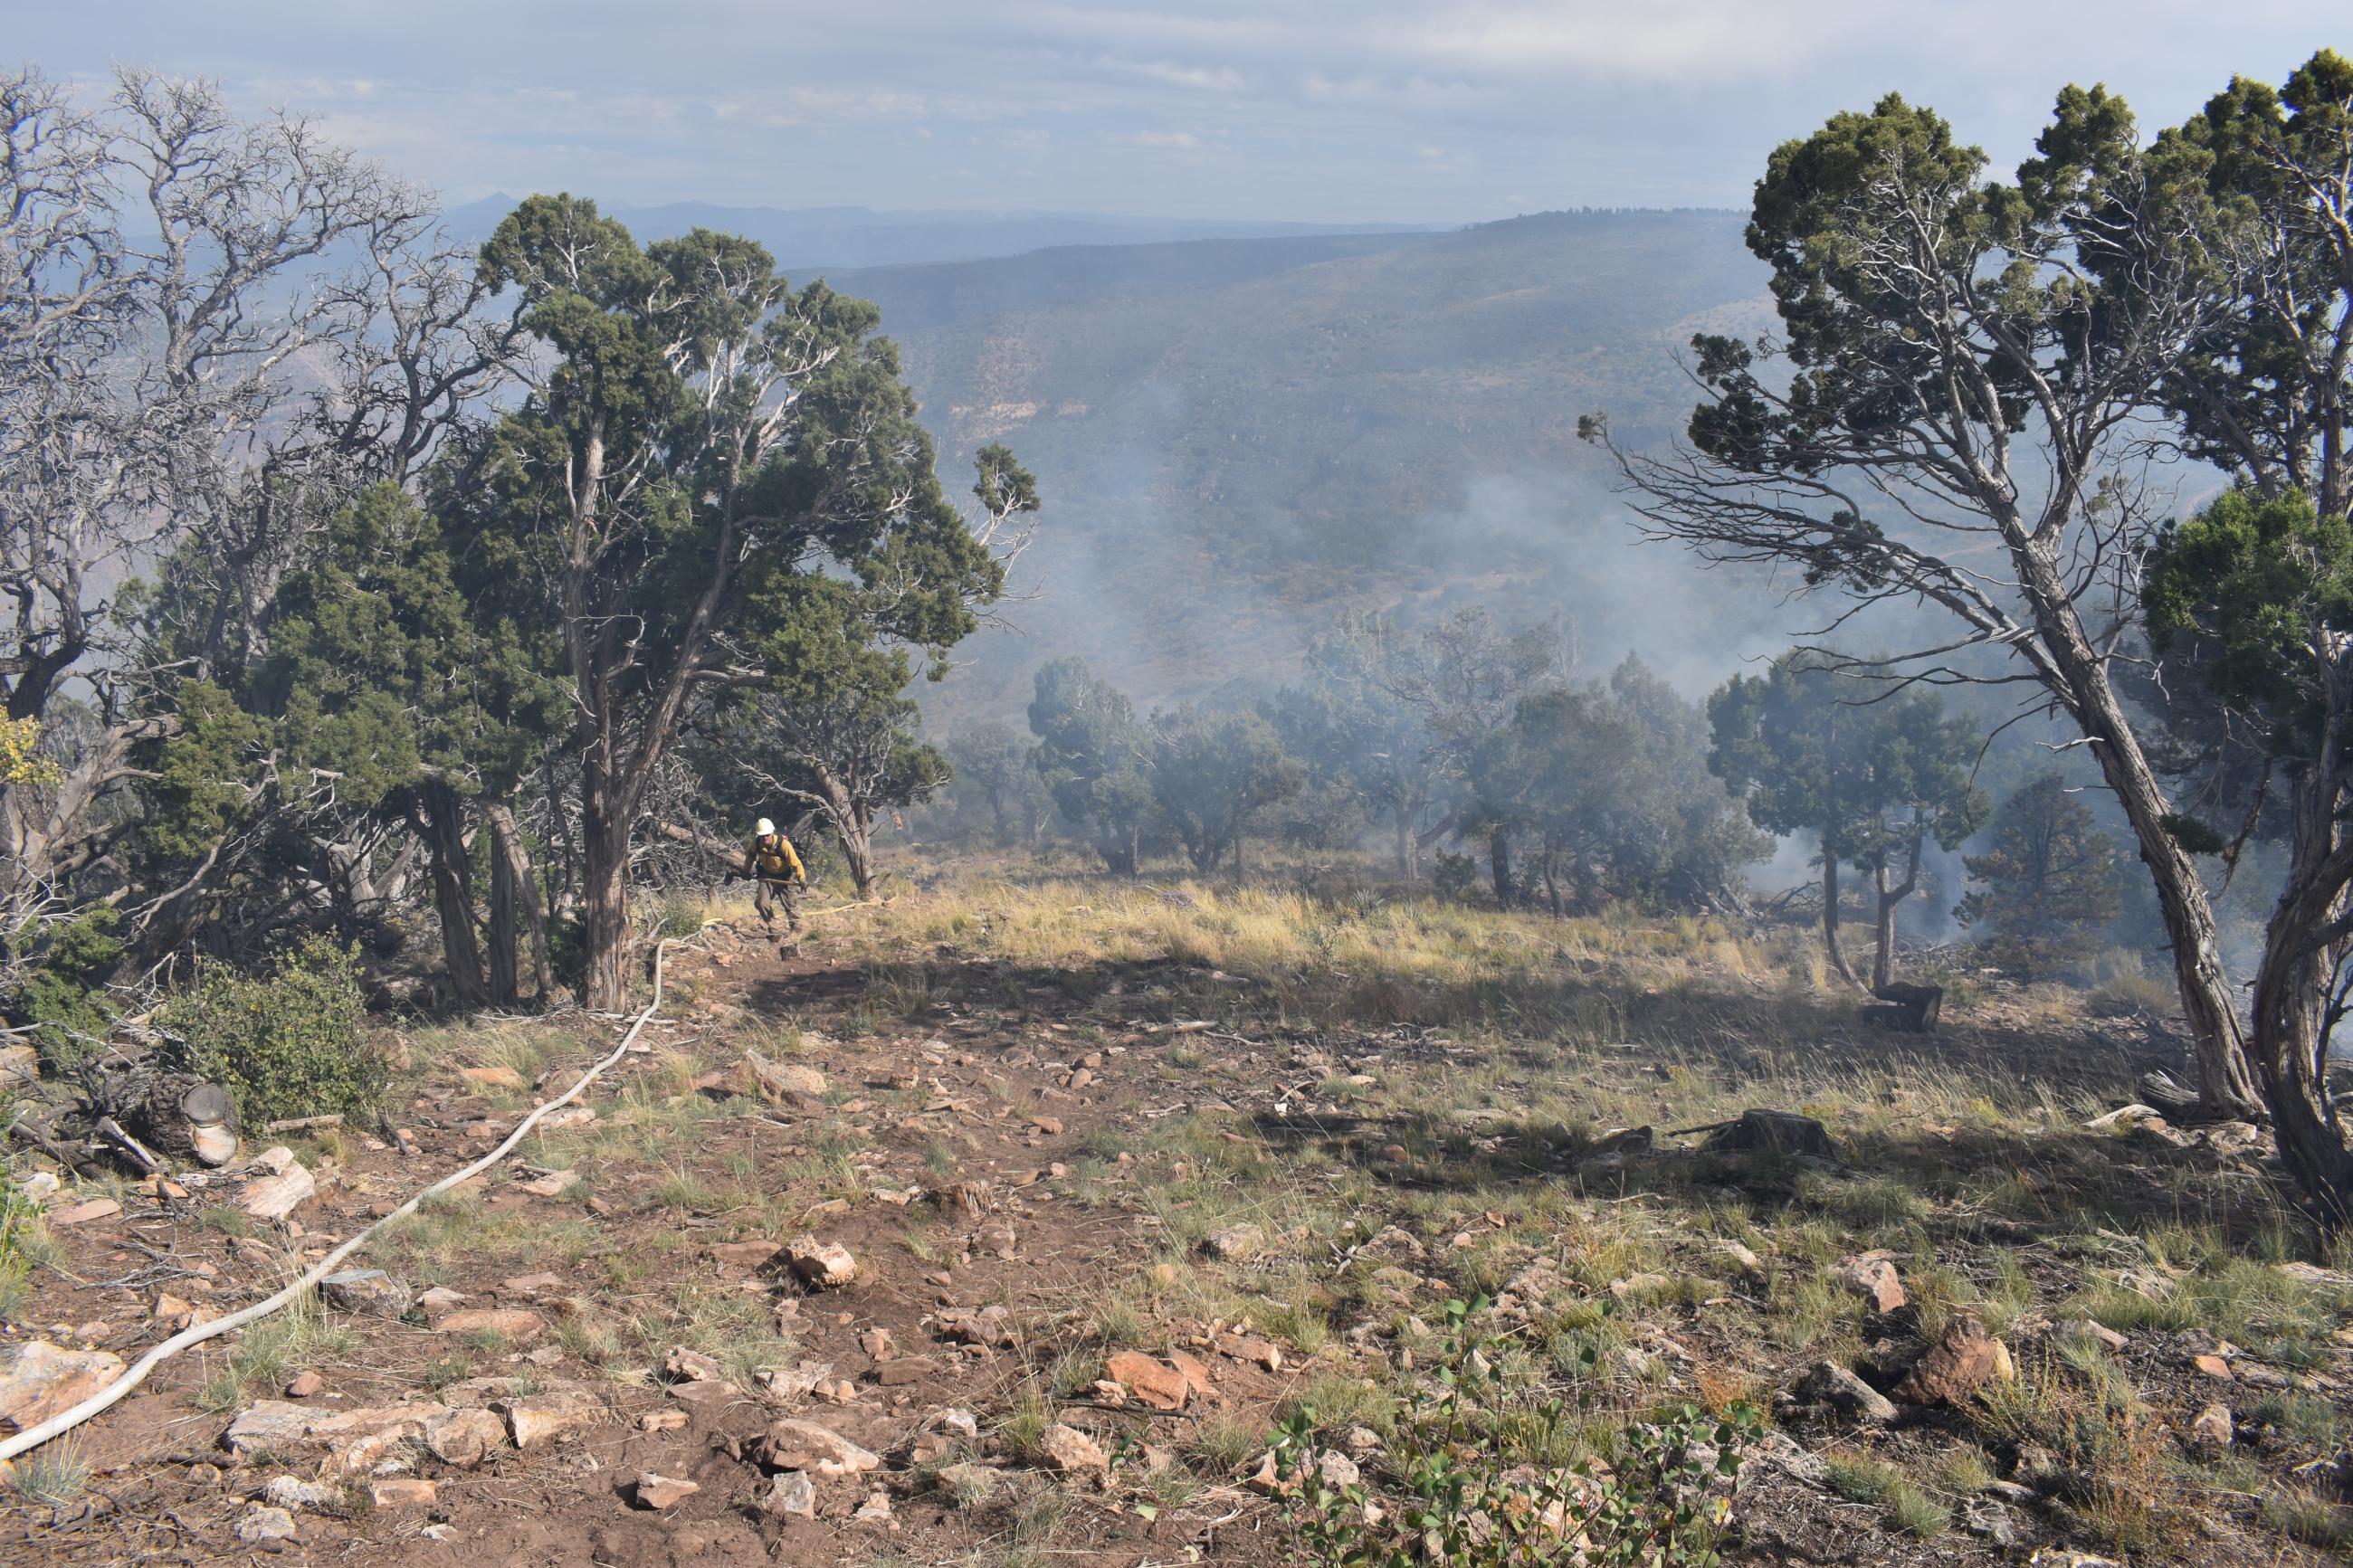 Image of a firefighter hiking up the north line of the prescribed burn, with hose lay on the side, Pinyon pine, juniper trees, grass, and smoke.